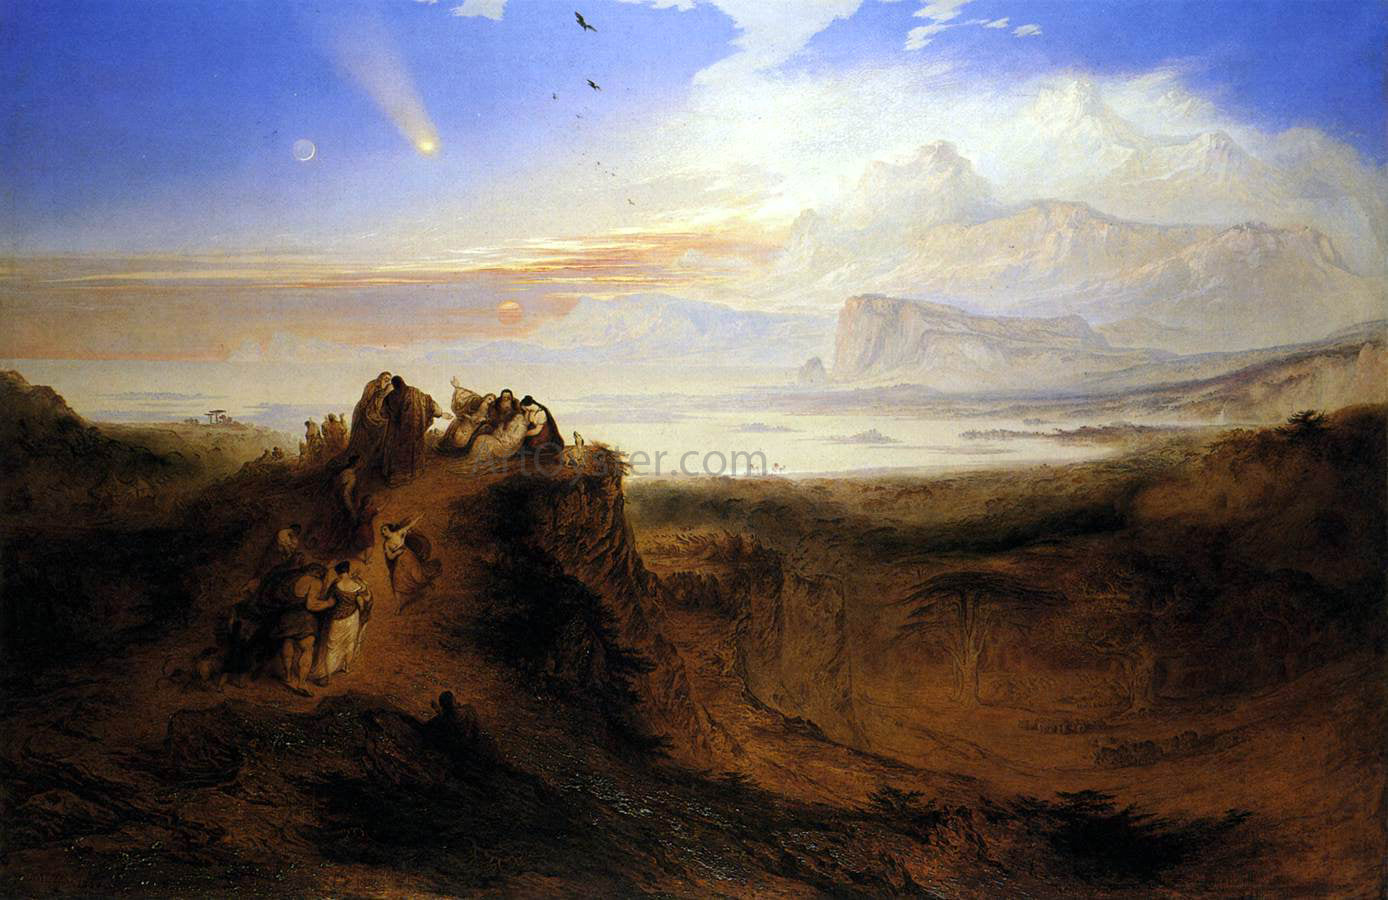  John Martin The Eve of the Deluge - Hand Painted Oil Painting